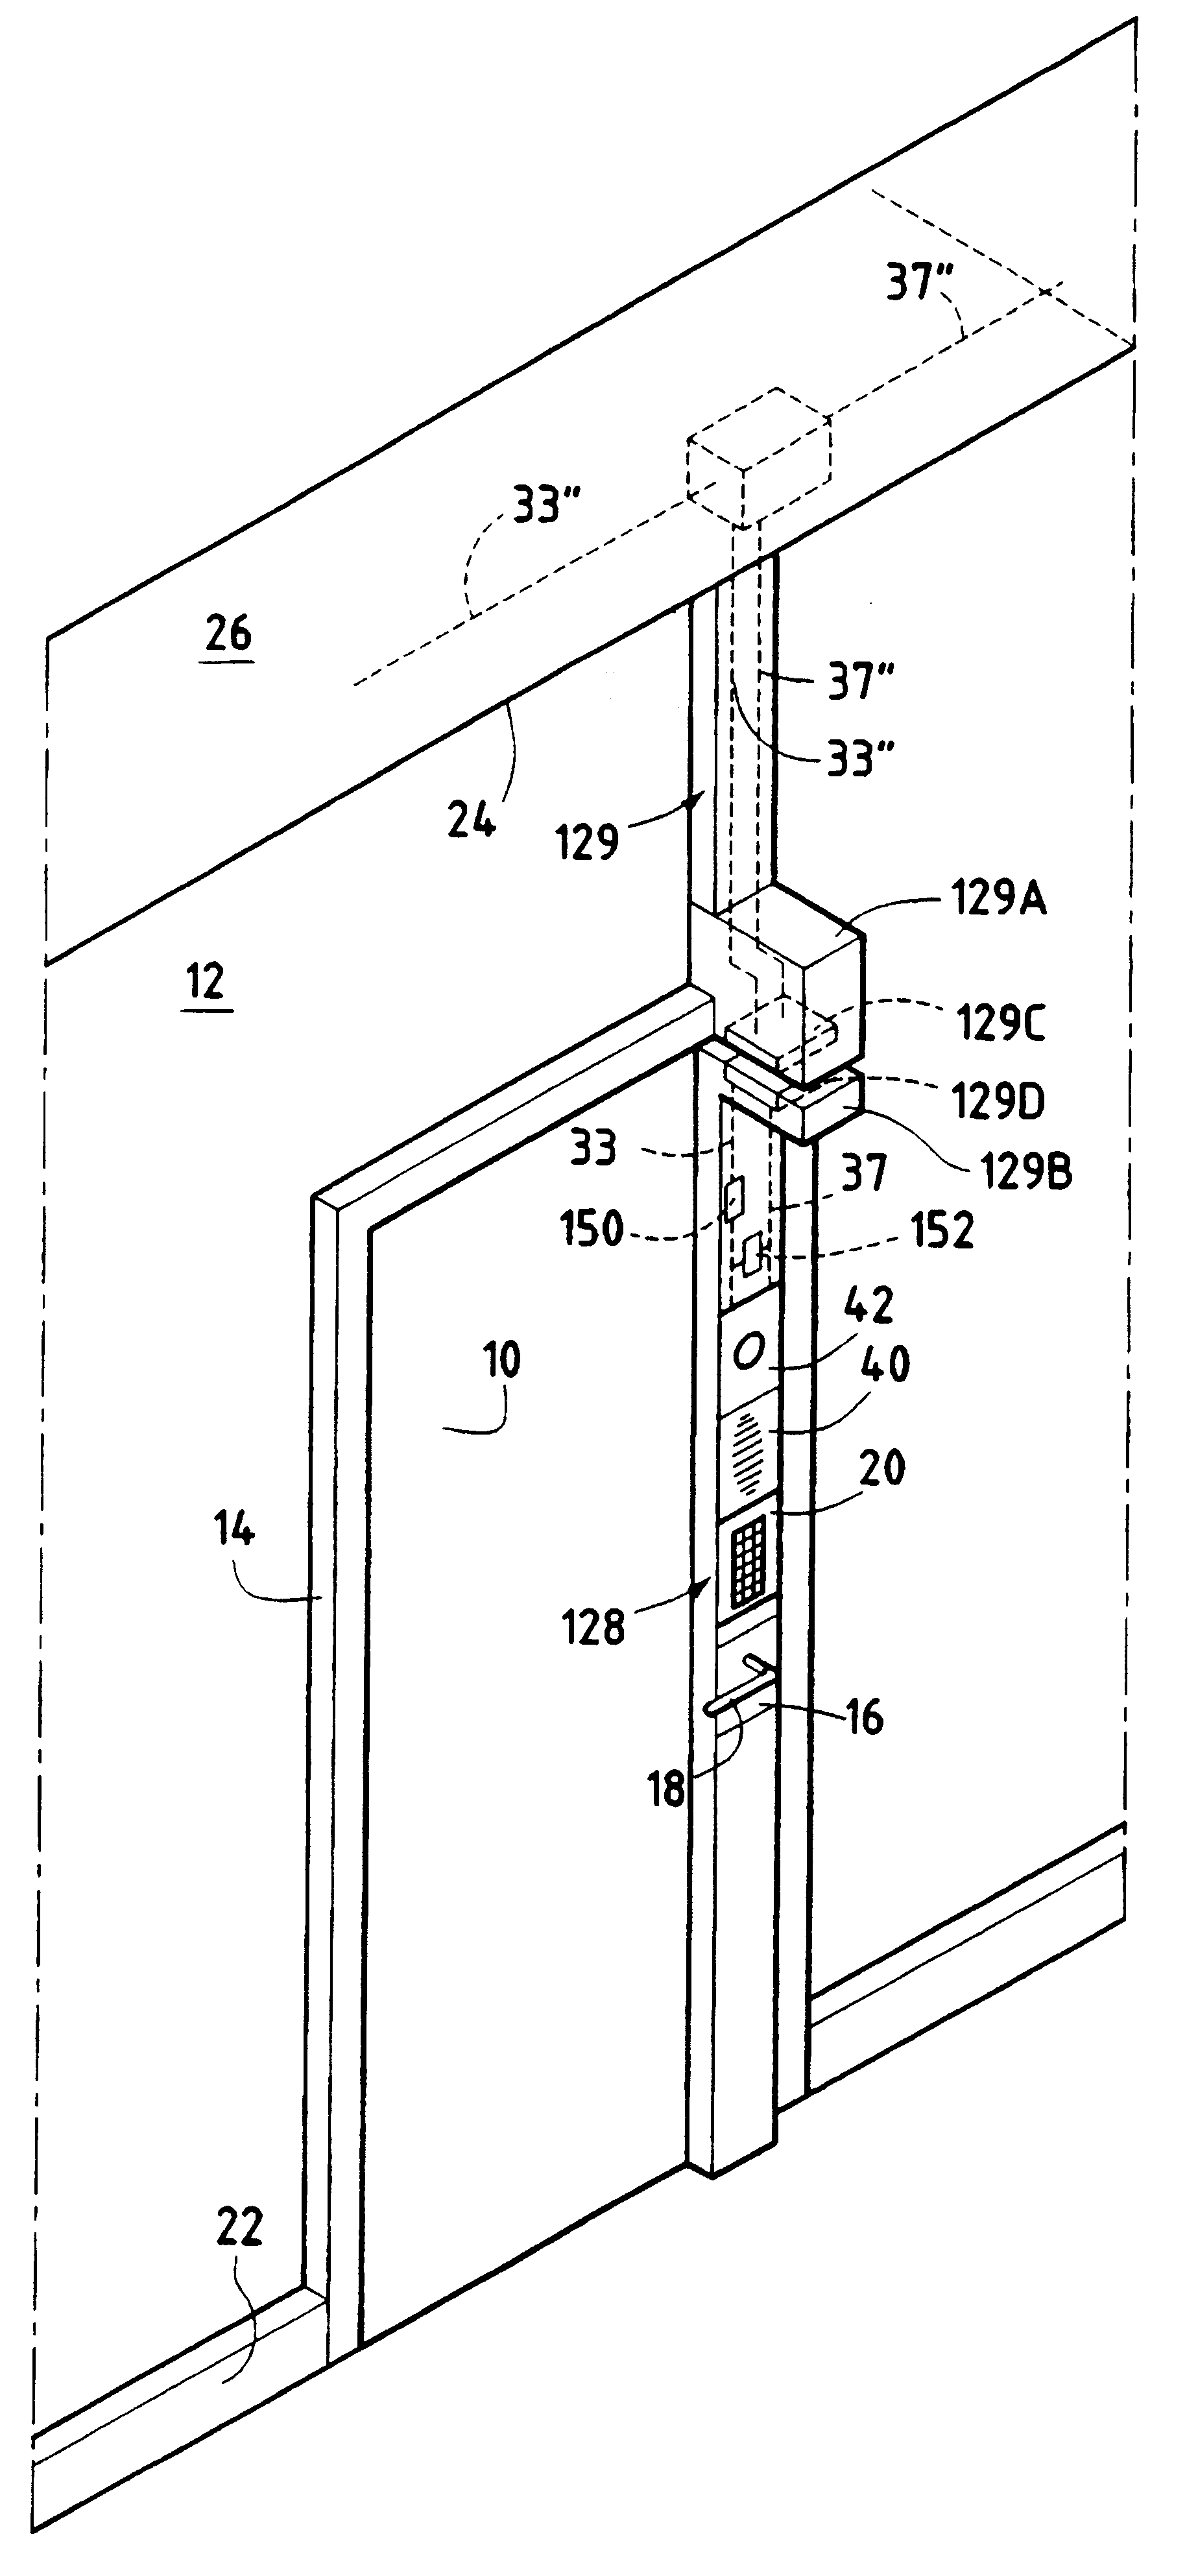 Apparatus for controlling the opening of a door